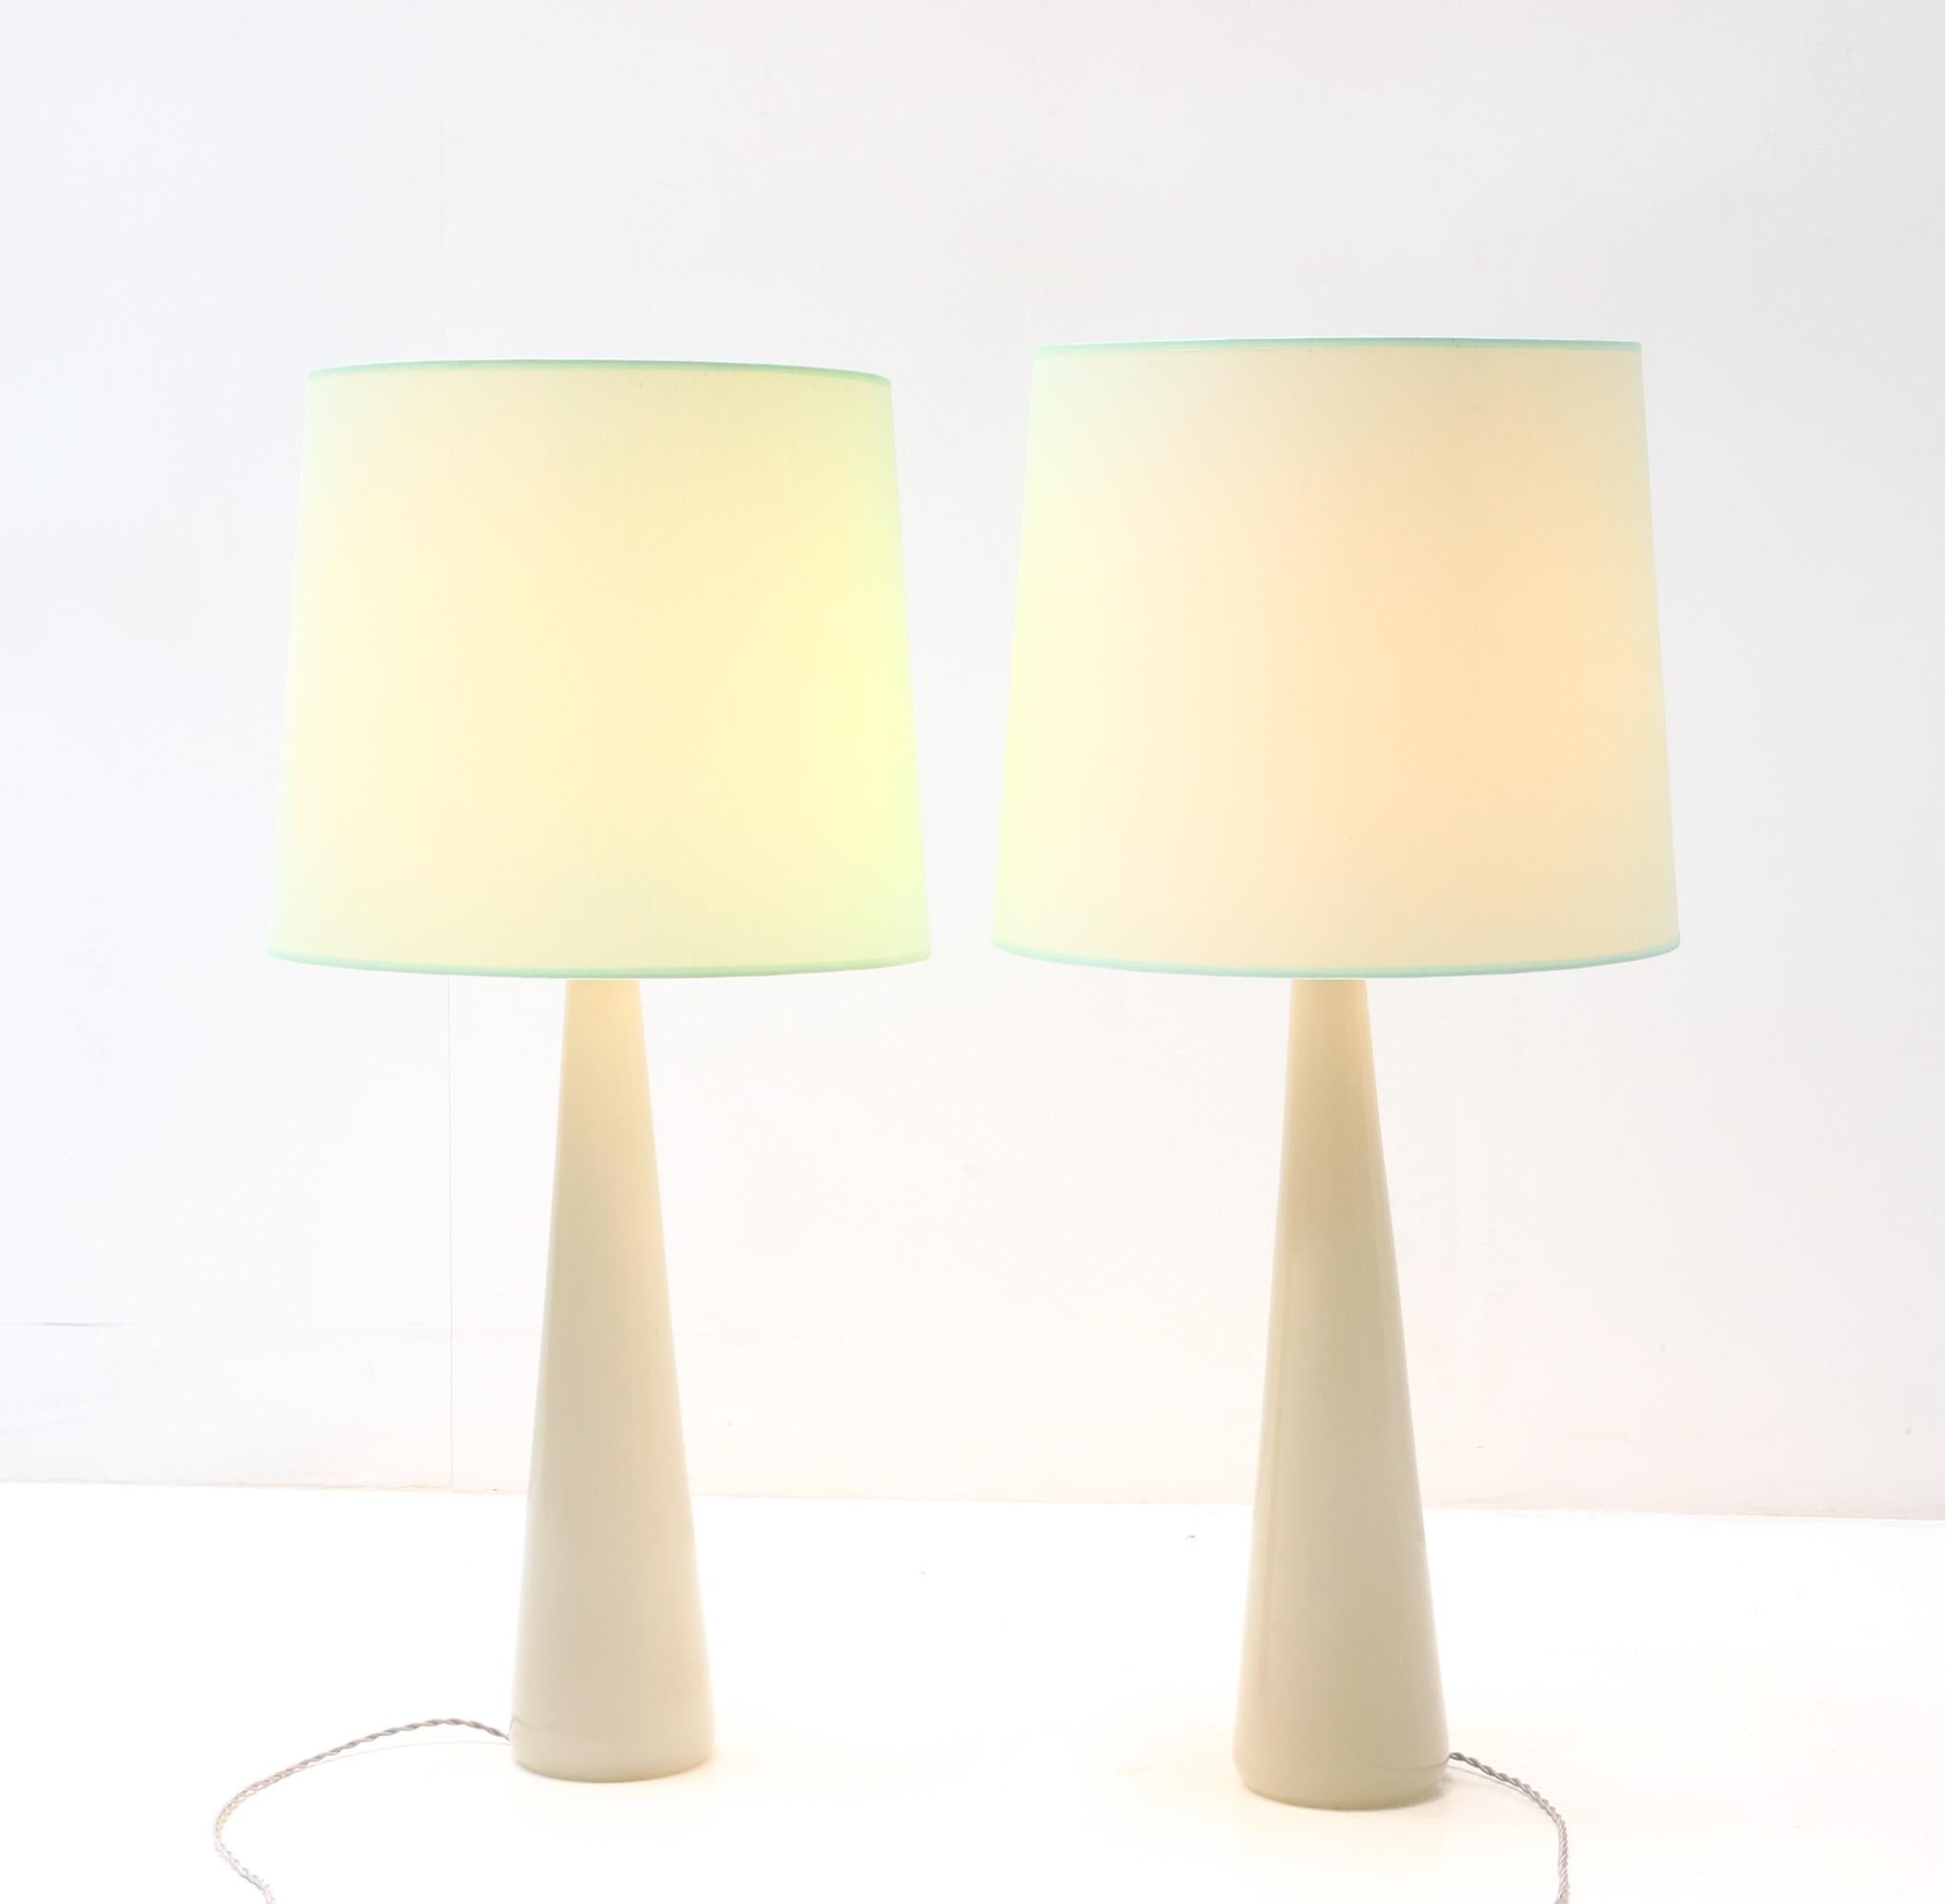 Fabric Two Mid-Century Modern Opaline Table Lamps by Archimede Seguso Murano, 1970s For Sale